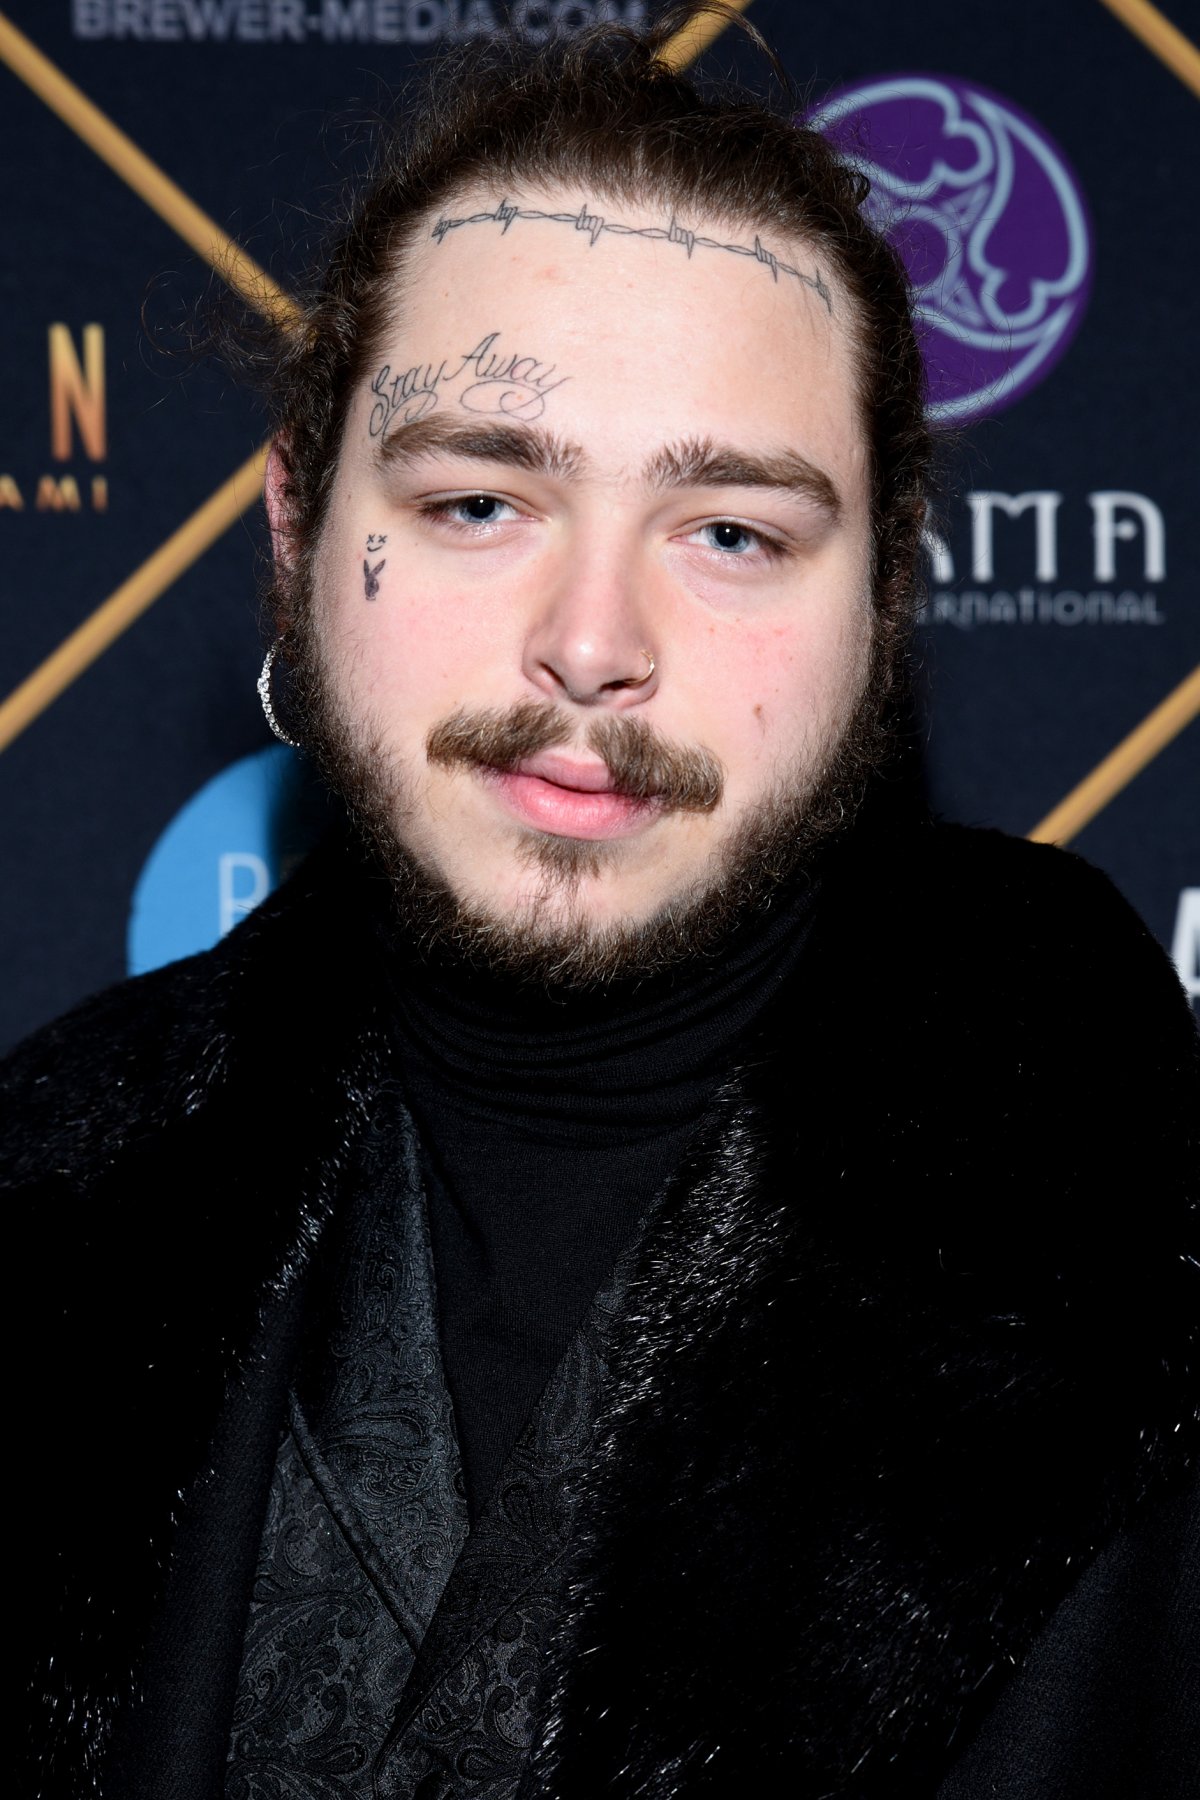 Post Malone returns with 'Chemical' single, music video - Reality TV World